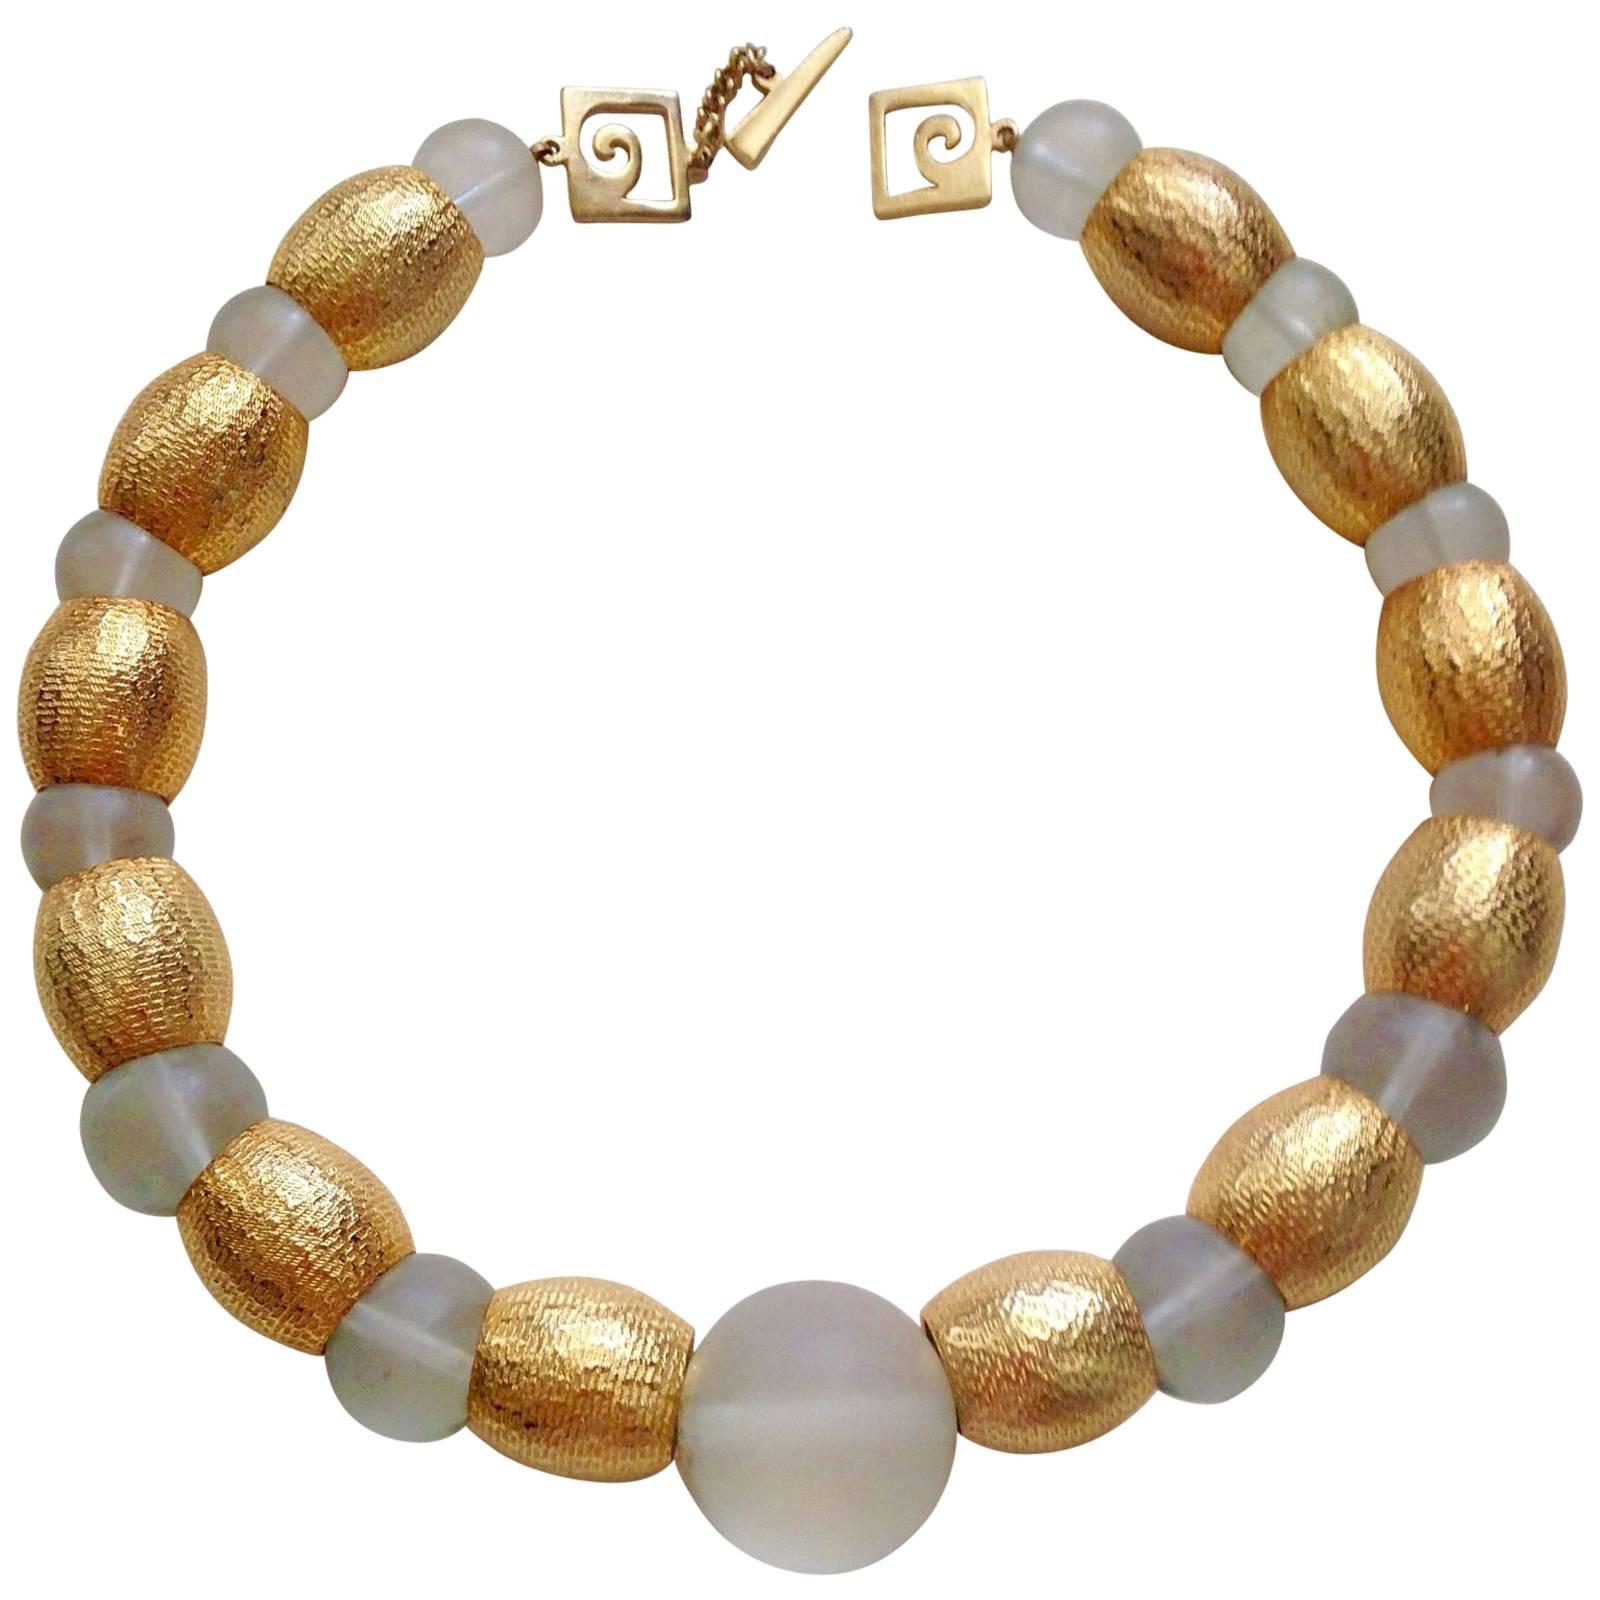 PIERRE CARDIN 1970's Brushed Goldtone and Frosted Acrylic Ball Necklace For Sale